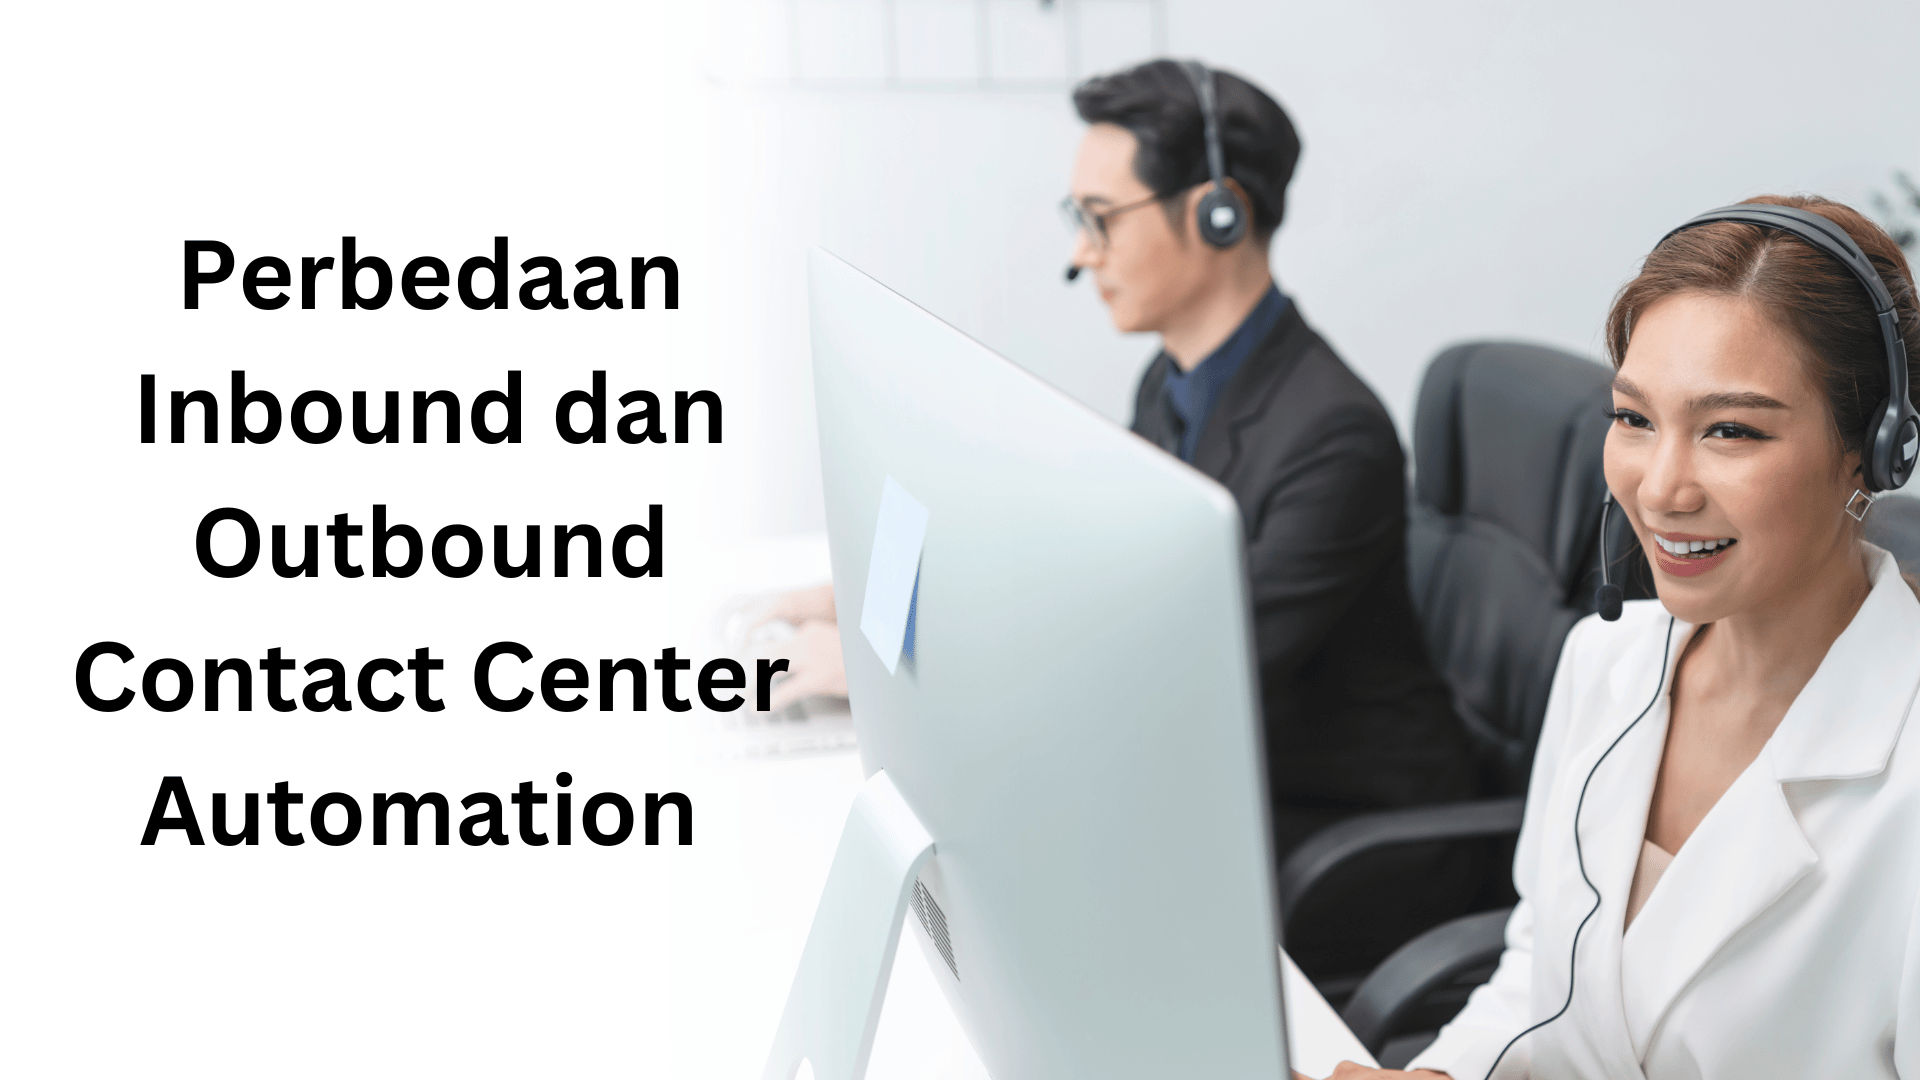 Image of Perbedaan Inbound dan Outbound Contact Center Automation 